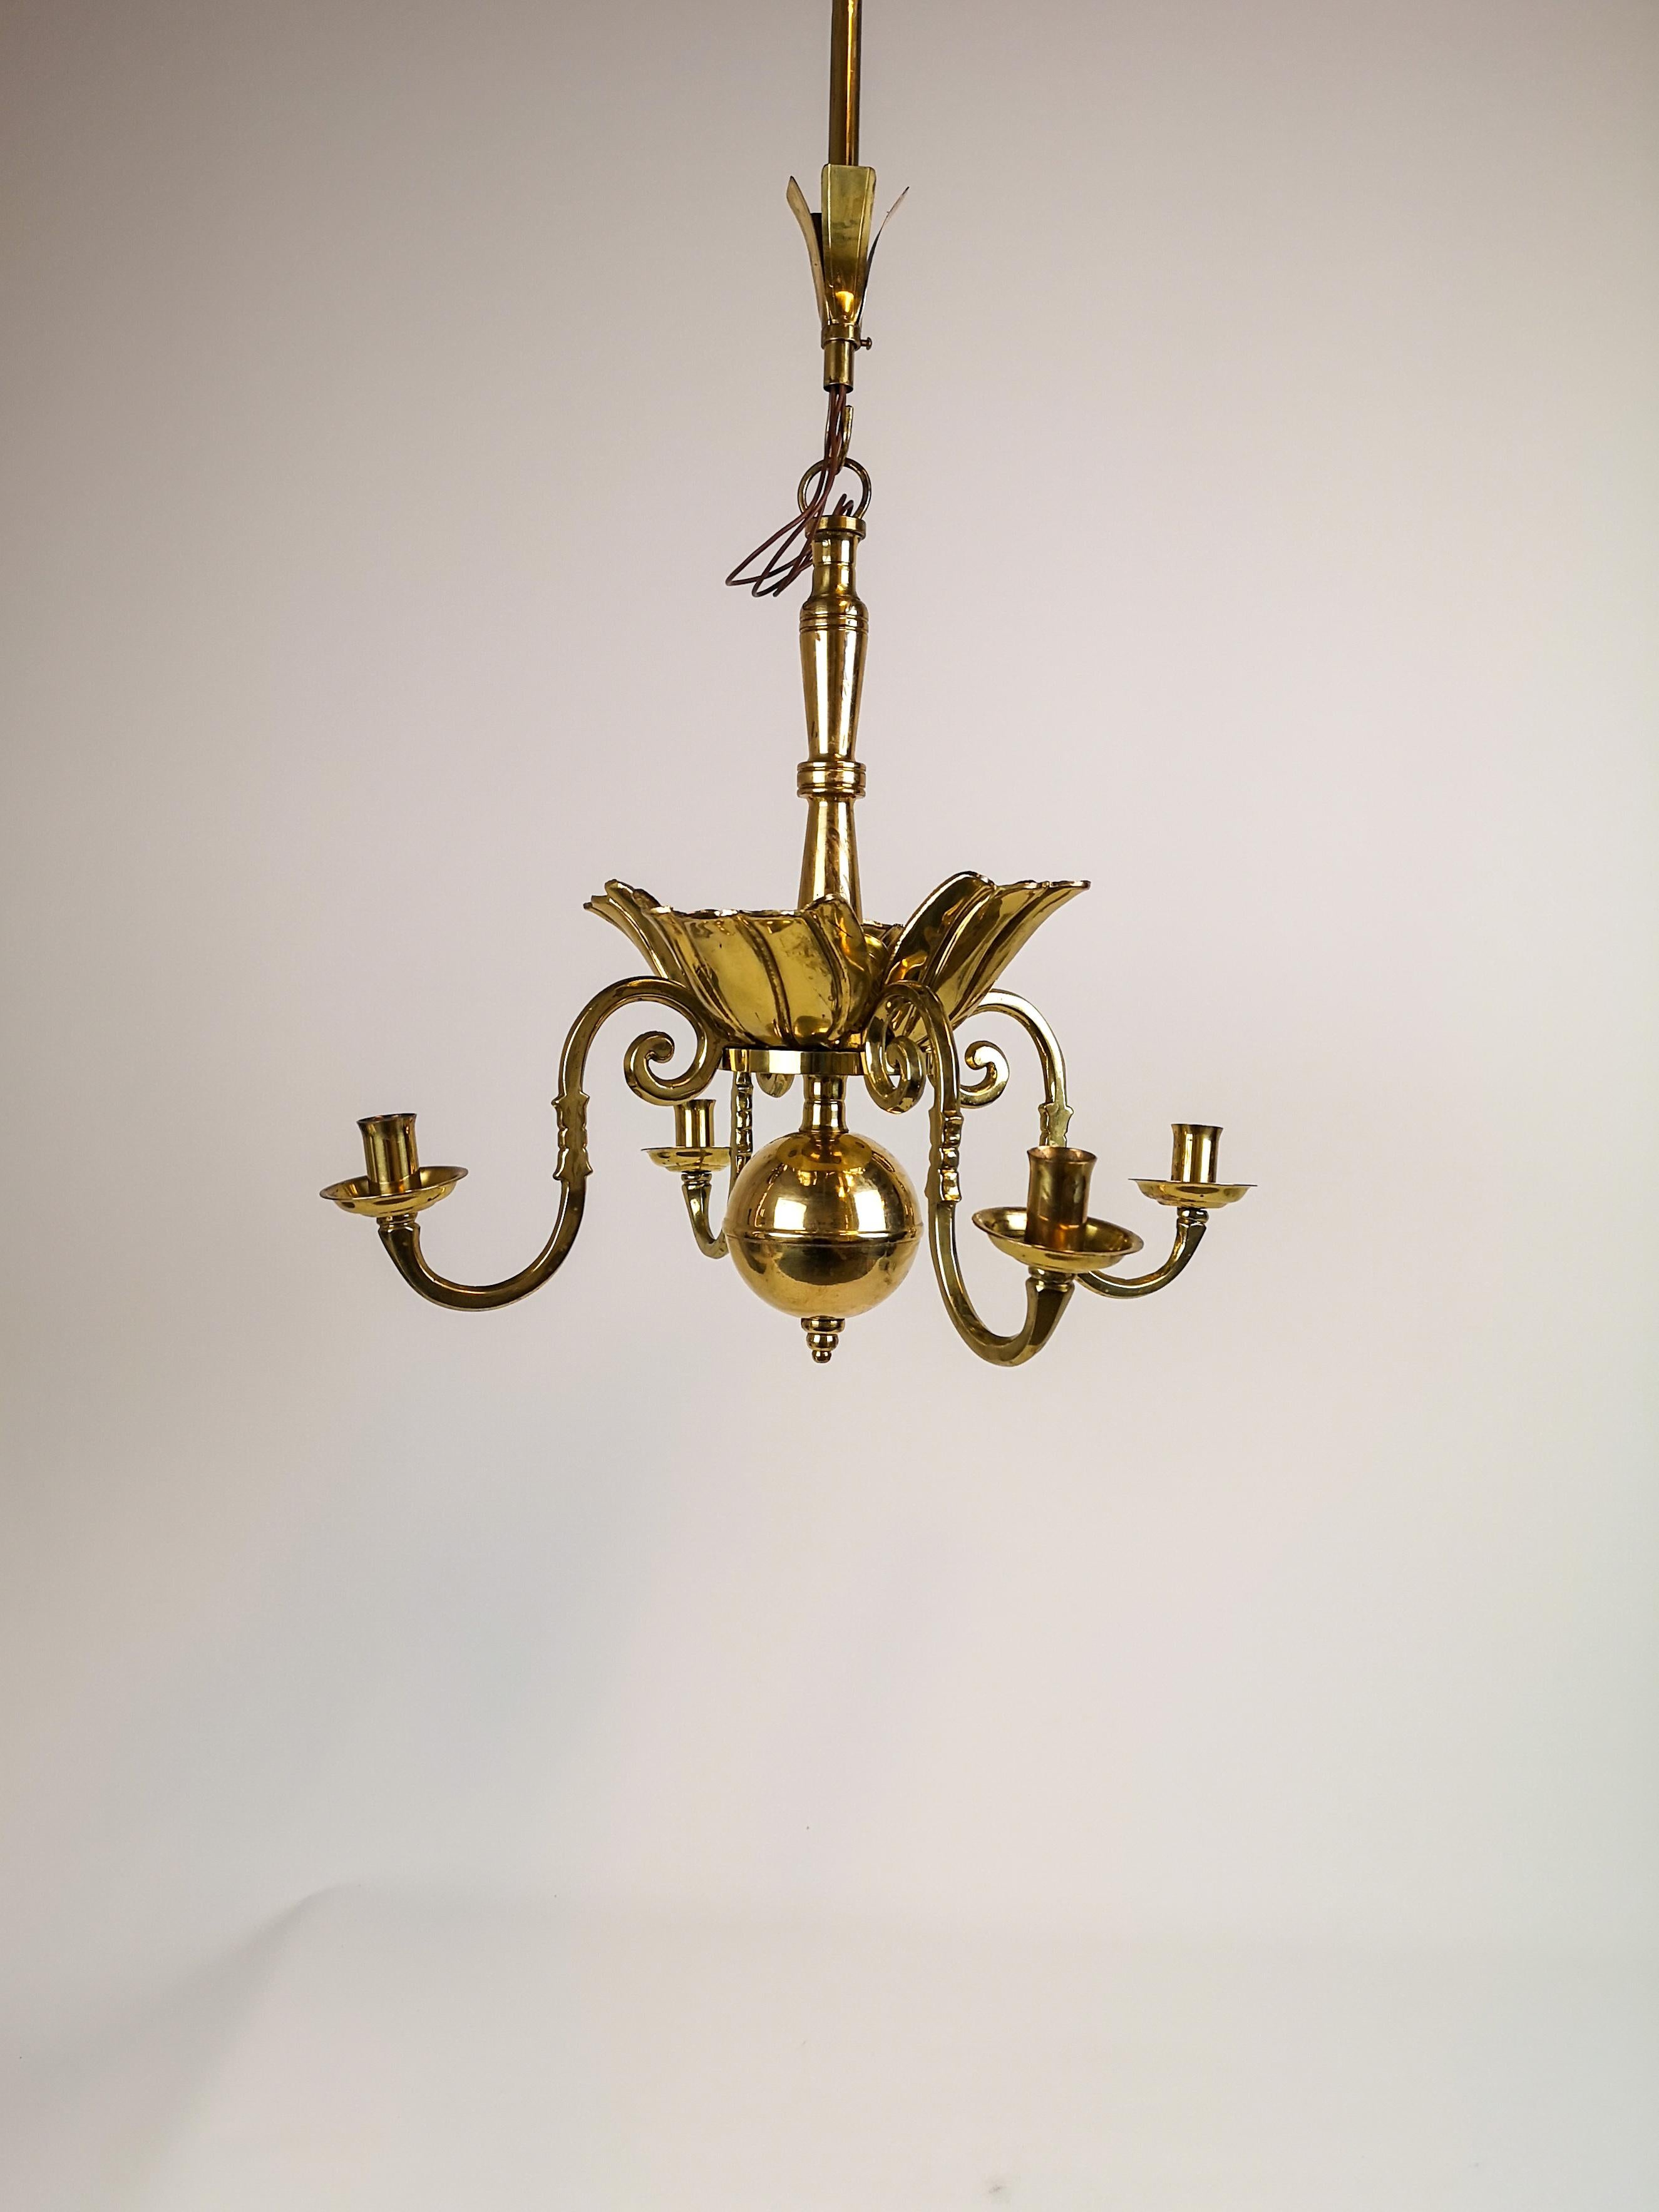 This wonderful brass chandelier was made in Sweden by the factory Lars Holmström Arvika. This chandelier is in solid brass and made by pure craftsmanship. Provided with both electric lightning as well as the possibility to use candle lights.

Good